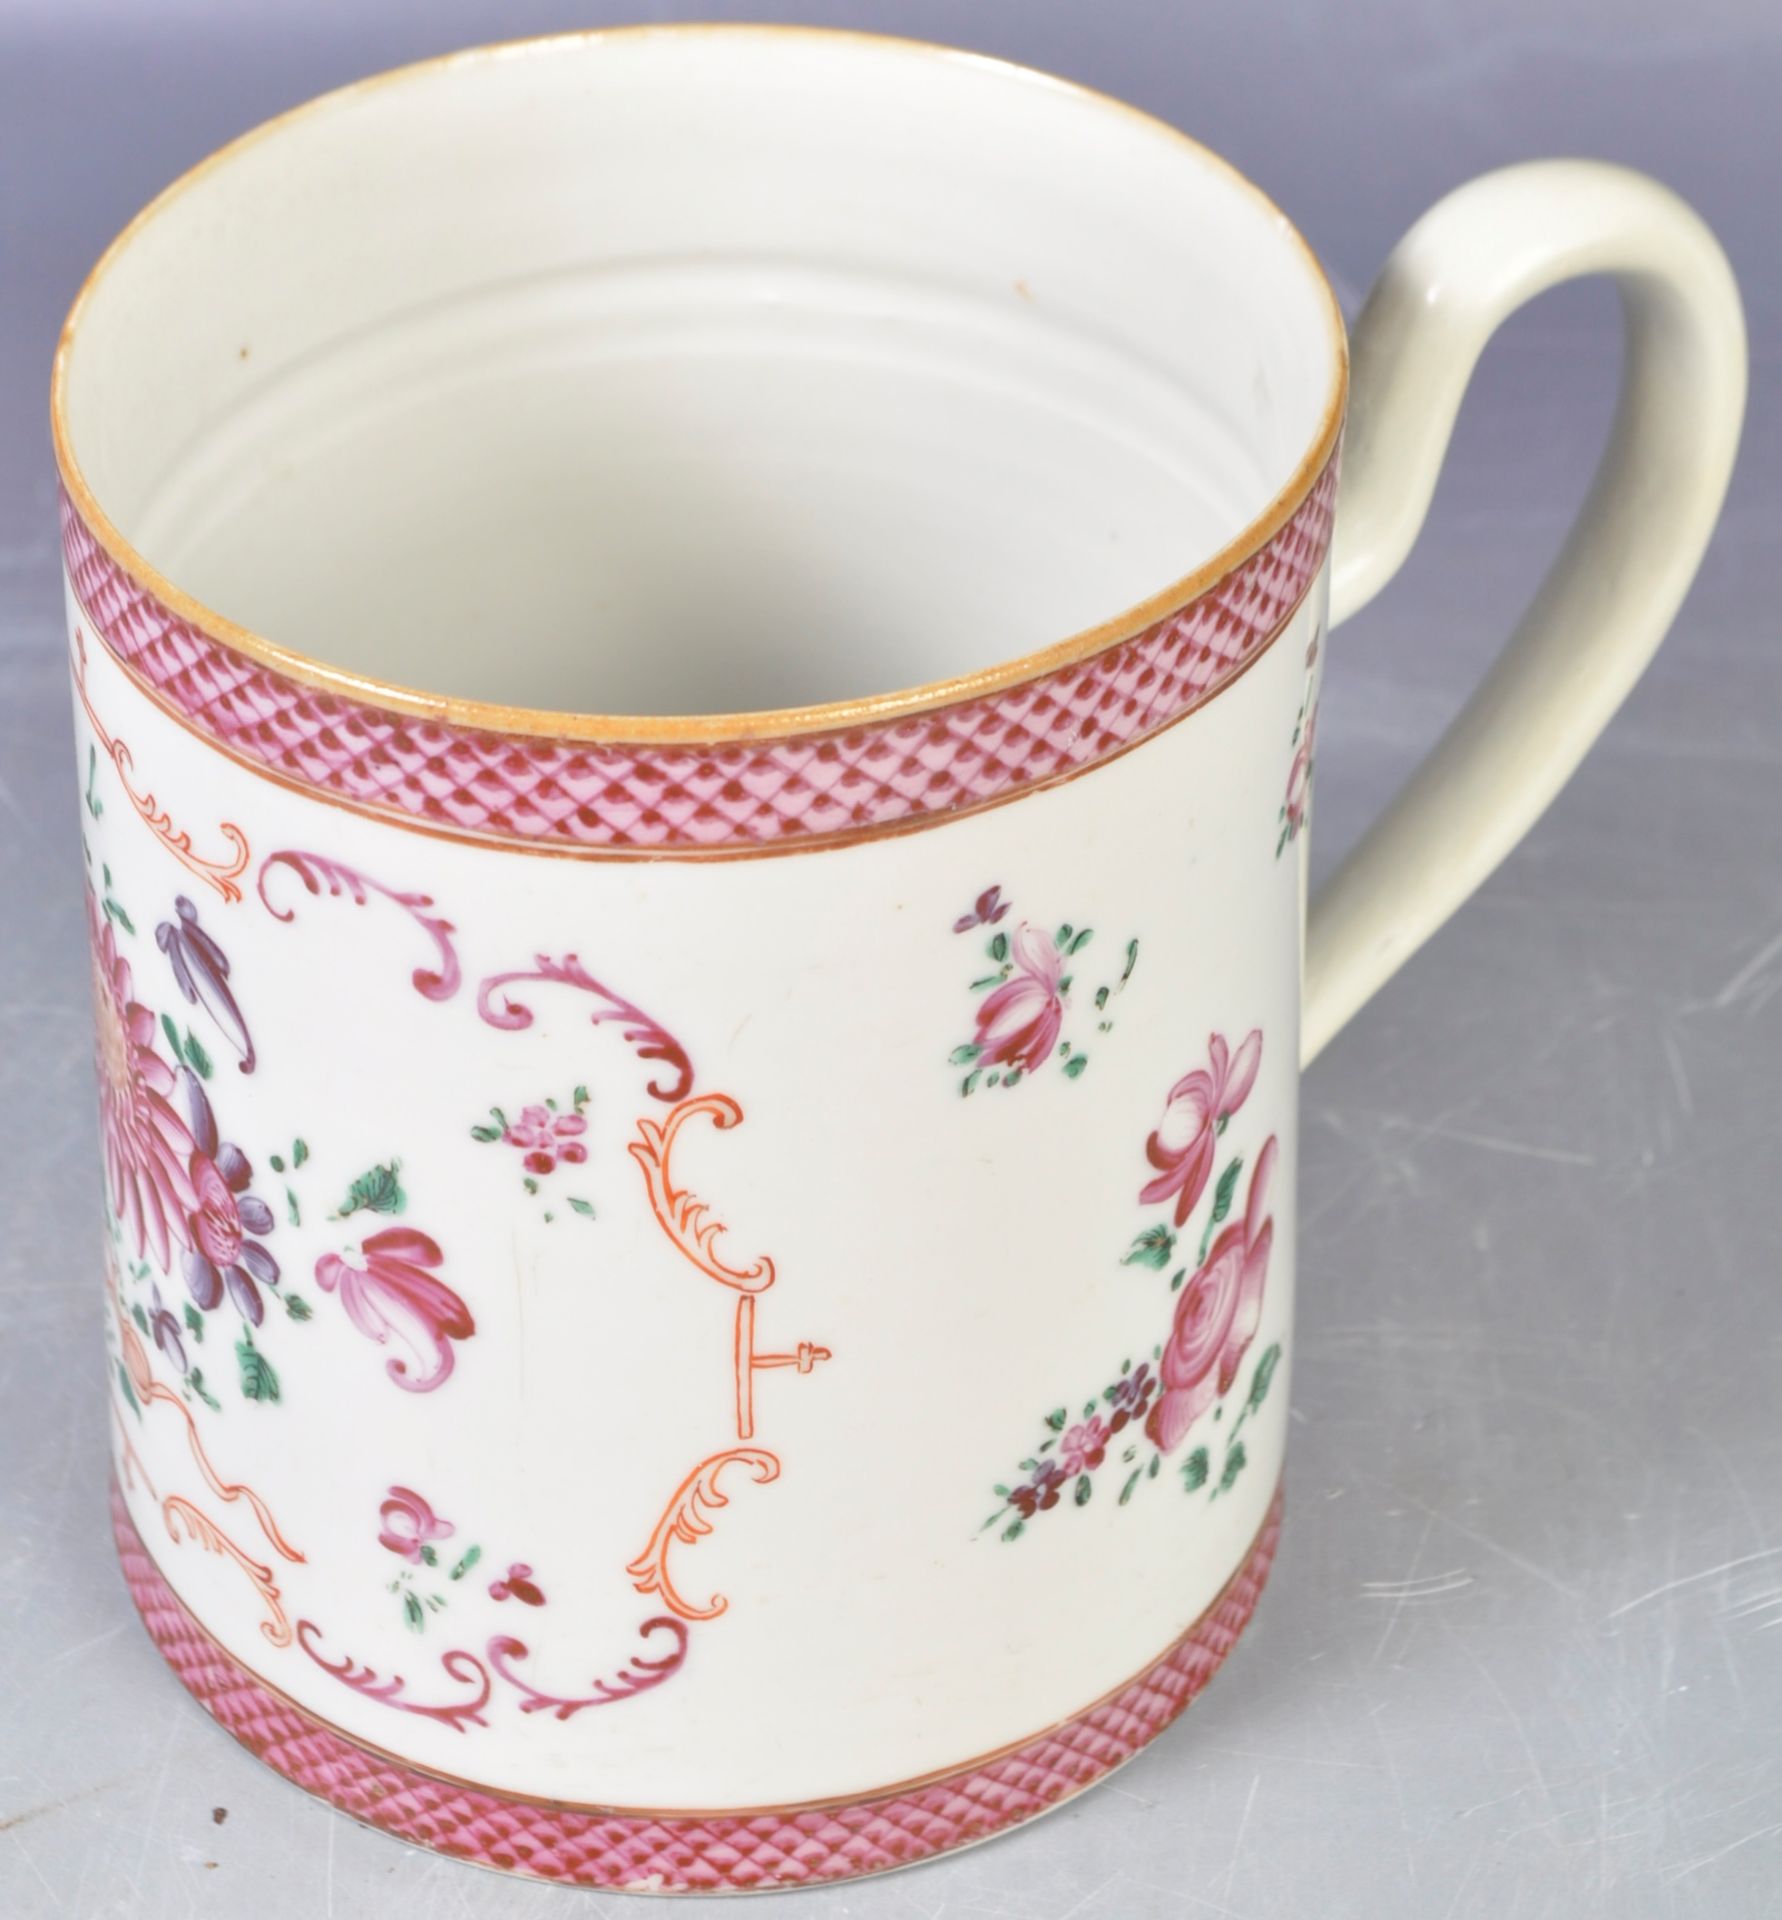 18TH CENTURY CHINESE EXPORT WARE PORCELAIN TANKARD - Image 6 of 7